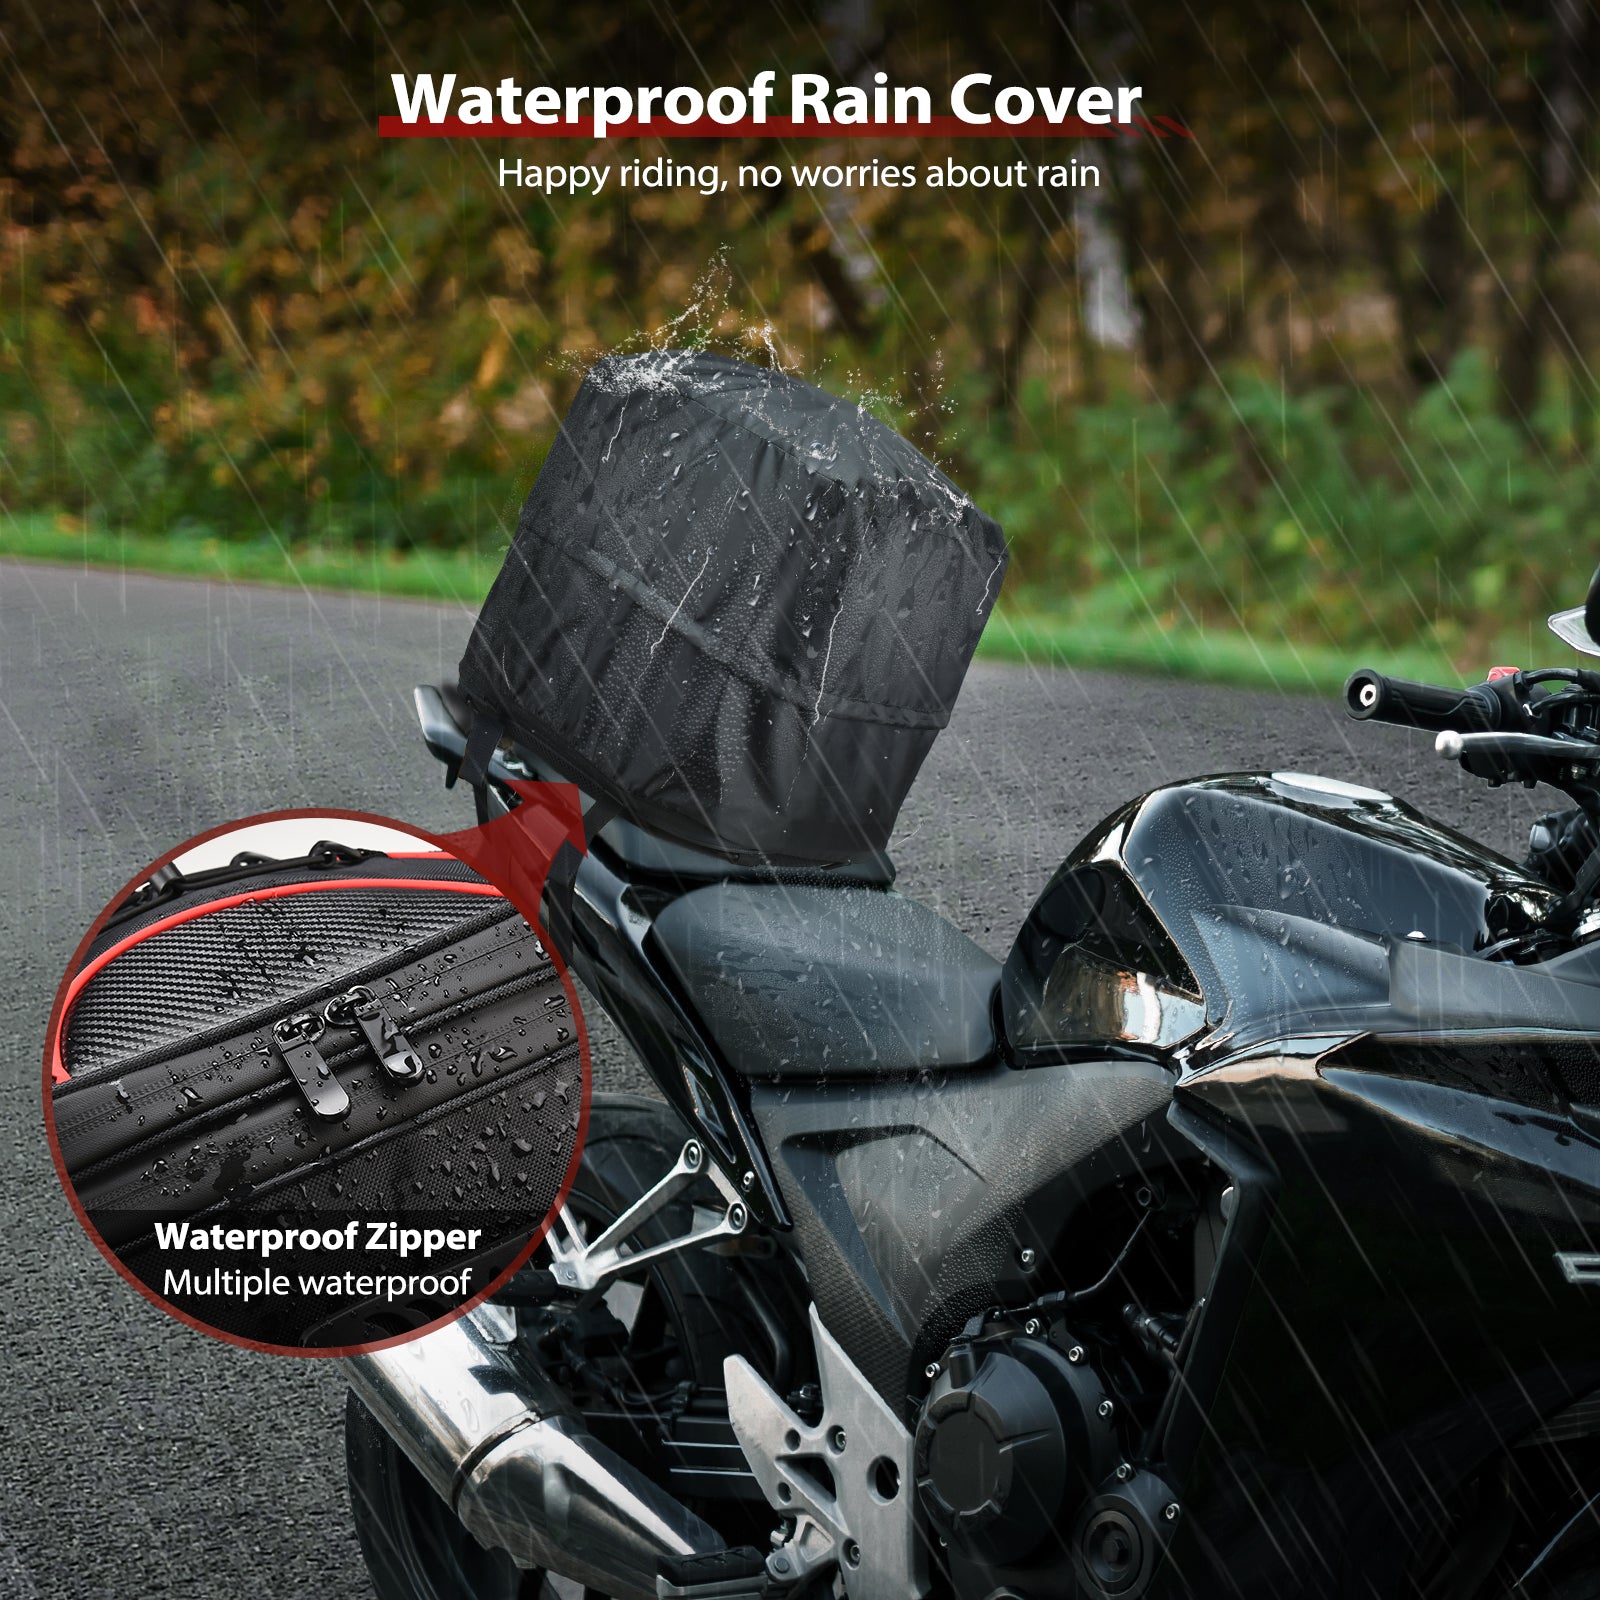 ZZM Motorcycle Tail Bag, 22L-34L Expandable Motorcycle Rear Seat Luggage Bags with Rain Cover, Dual Use Motorcycle Helmet Bags Backpack Storage for Motorbike Weekender Travel, Black